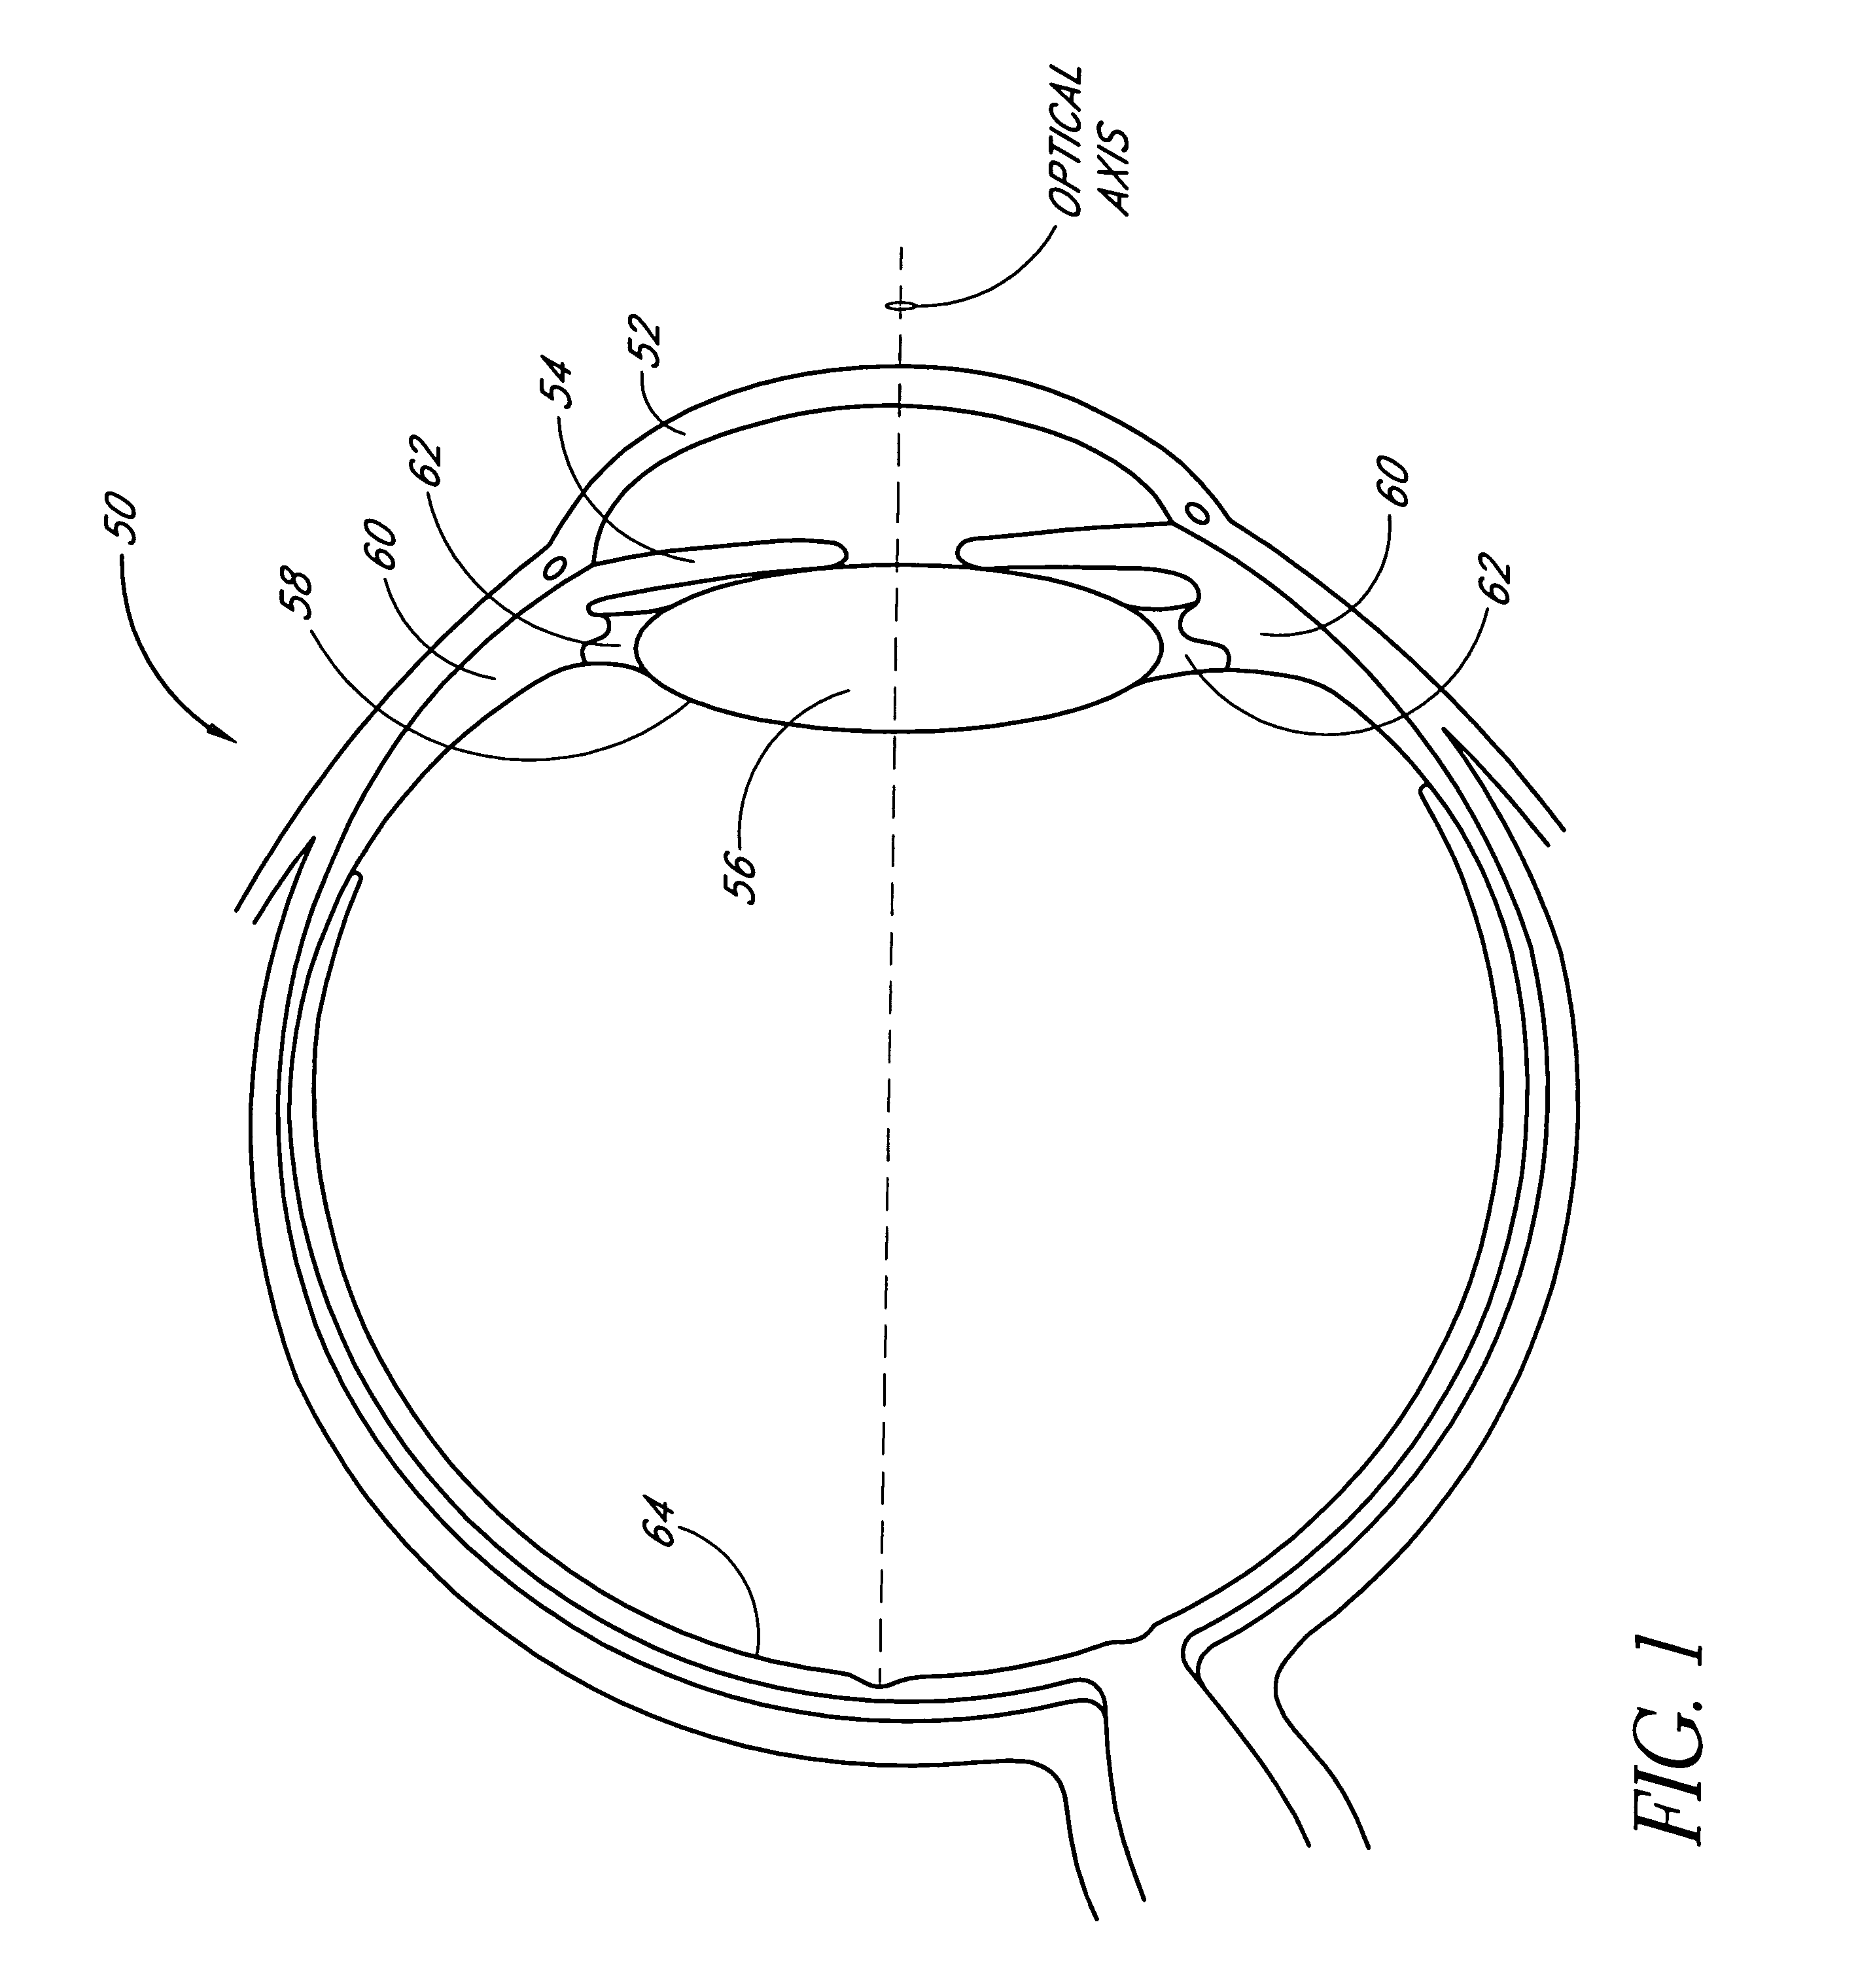 Materials for use in accommodating intraocular lens system